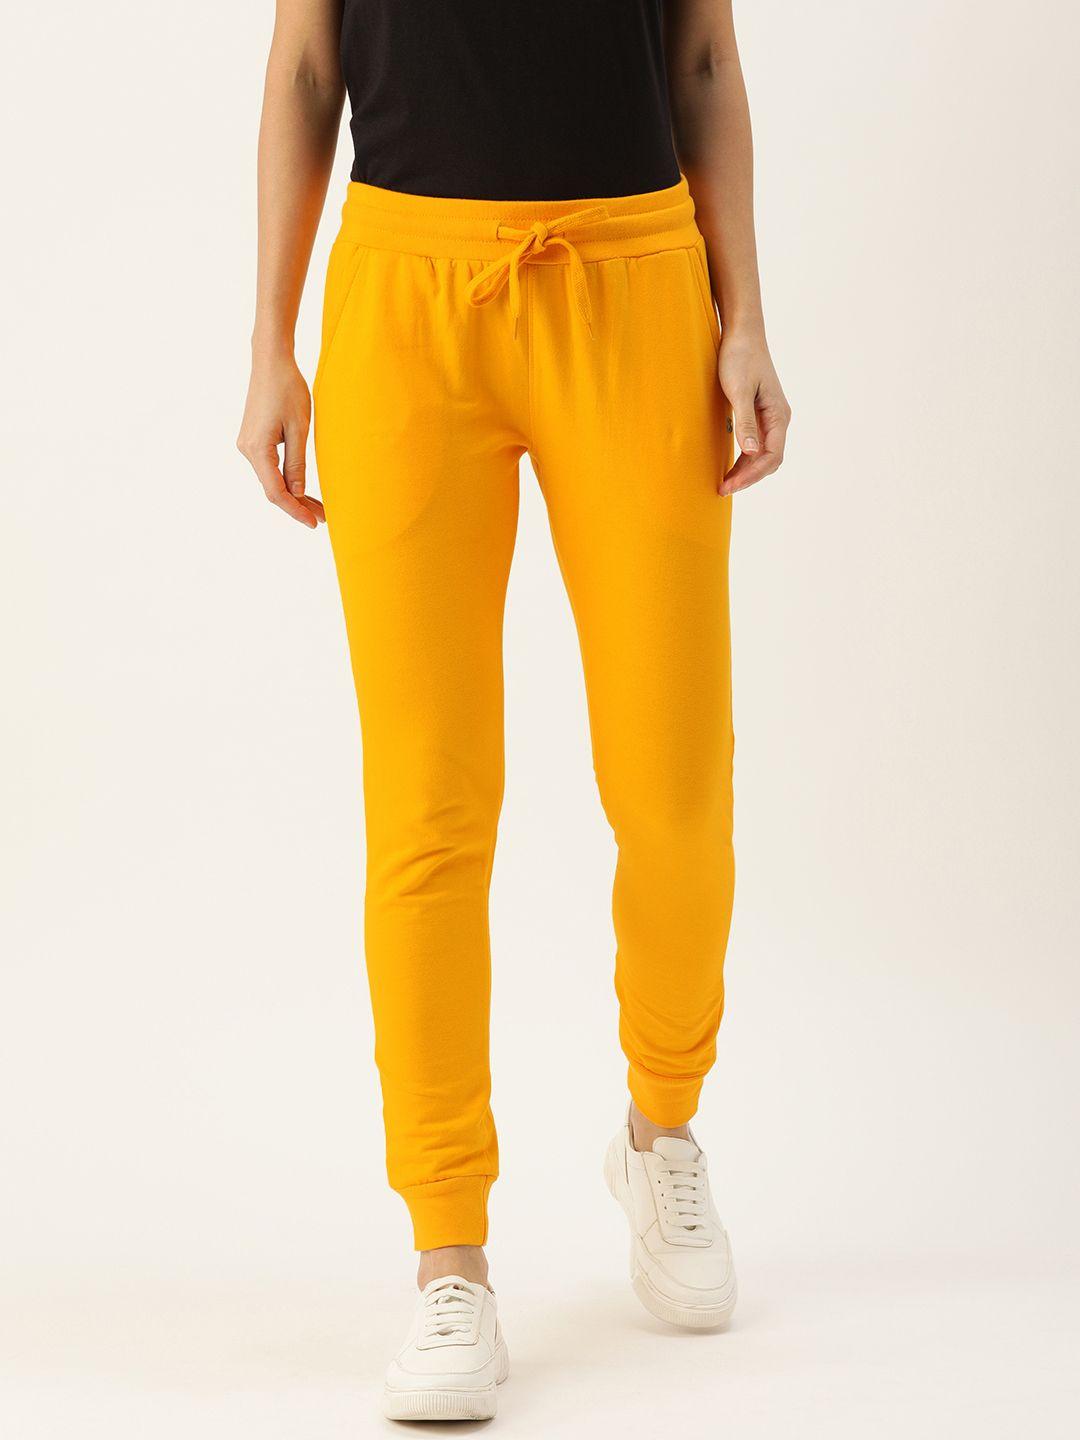 genius18 women yellow solid classic fit training joggers